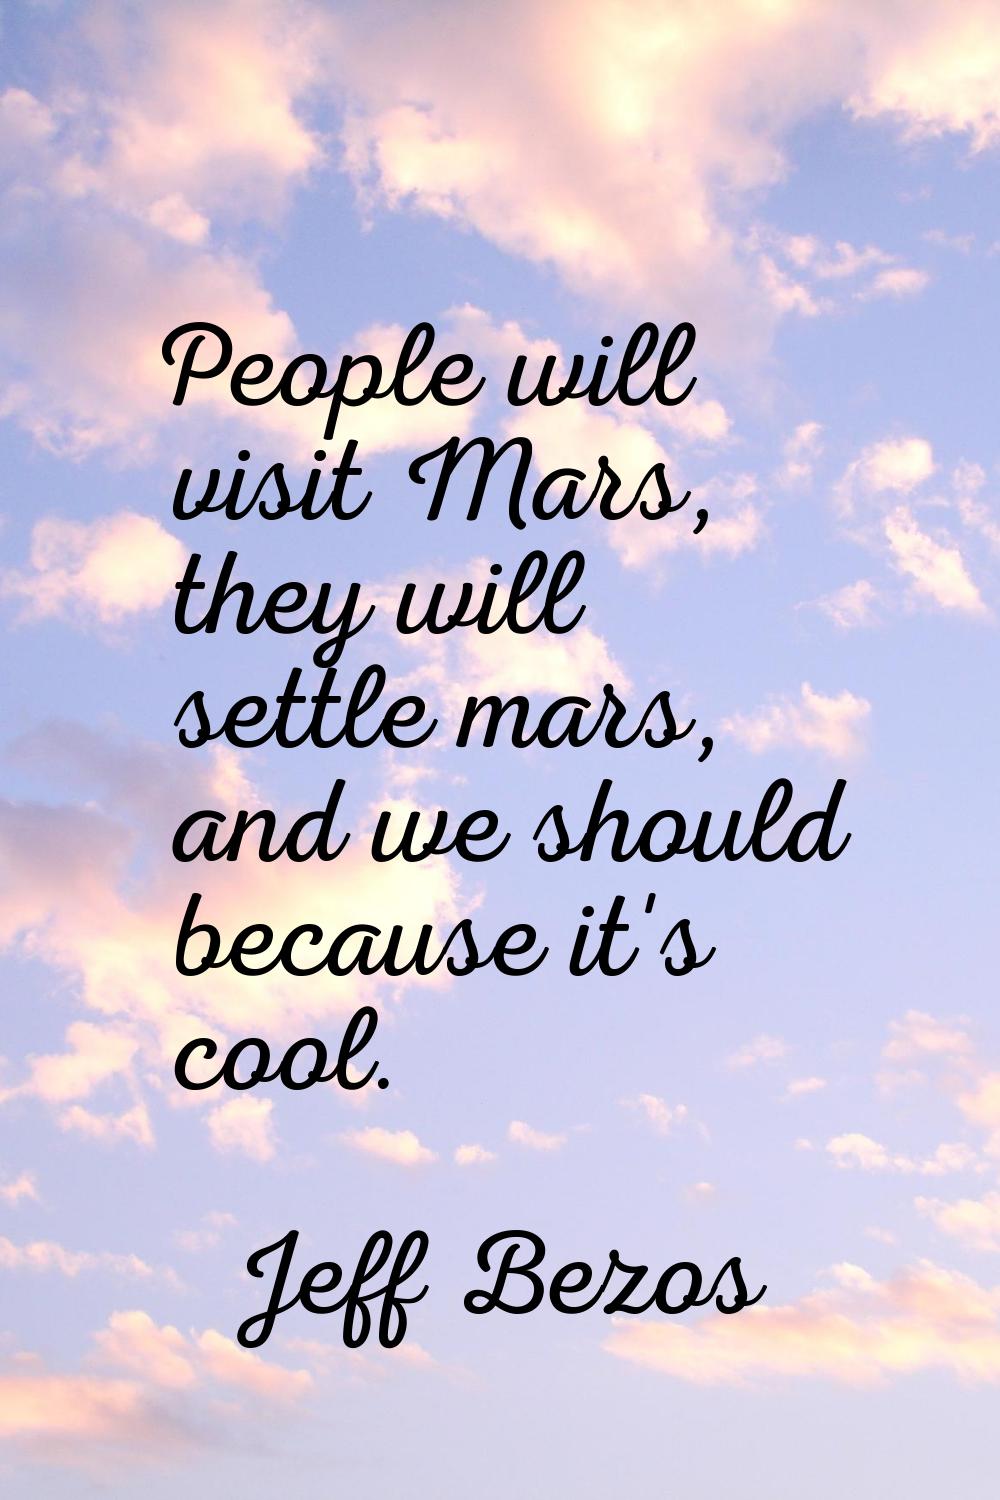 People will visit Mars, they will settle mars, and we should because it's cool.